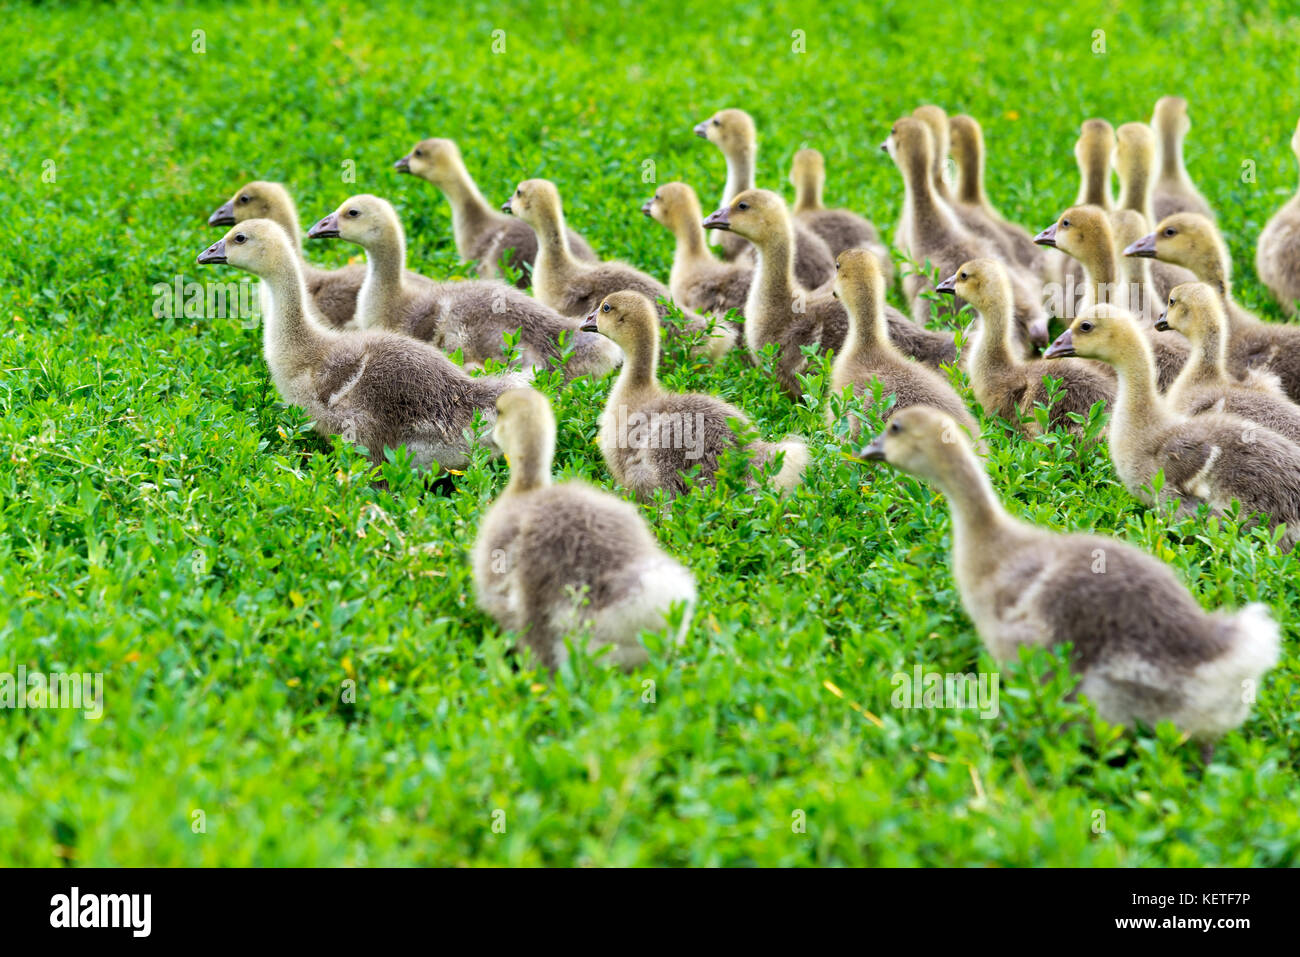 young goose at age of 1 month walking on grass Stock Photo